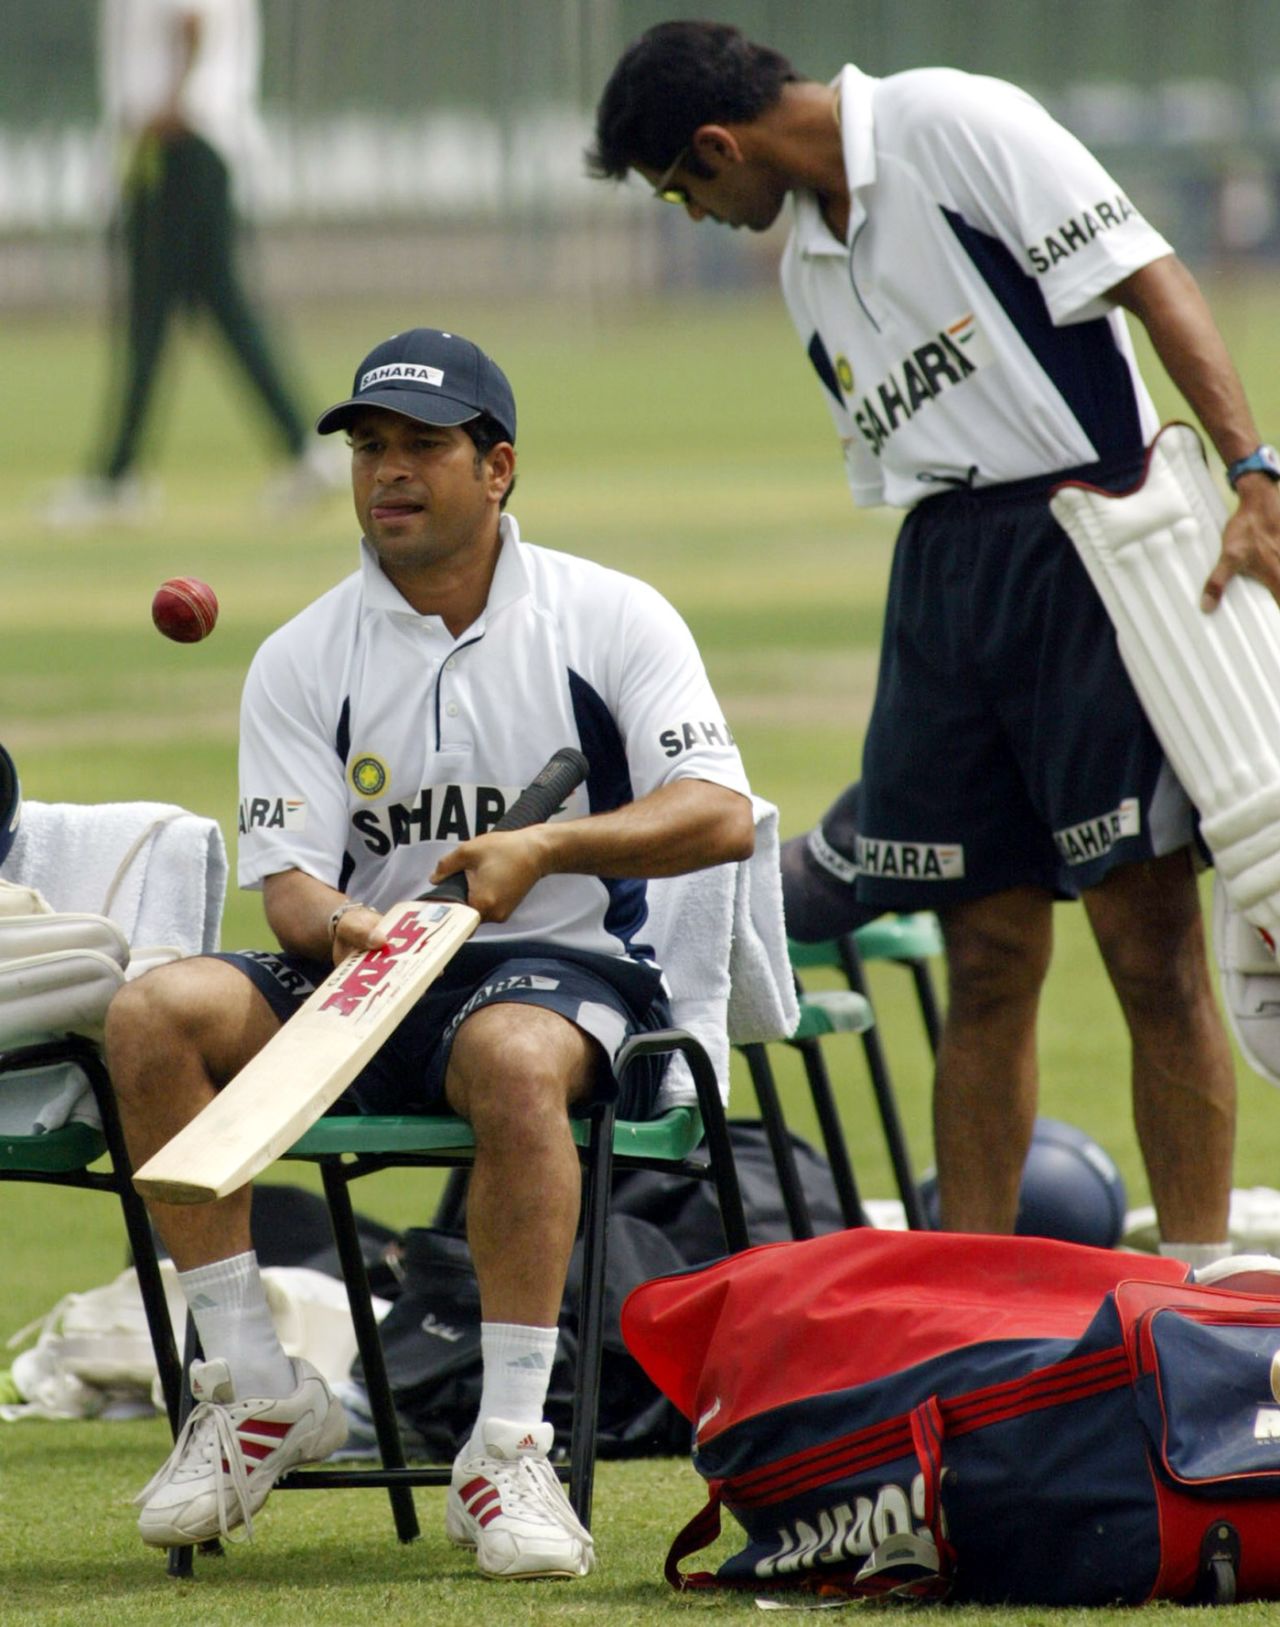 Sachin Tendulkar bounces a ball on his bat while Rahul Dravid prepares for net practice ahead of the second Test, Lahore, April 4, 2004